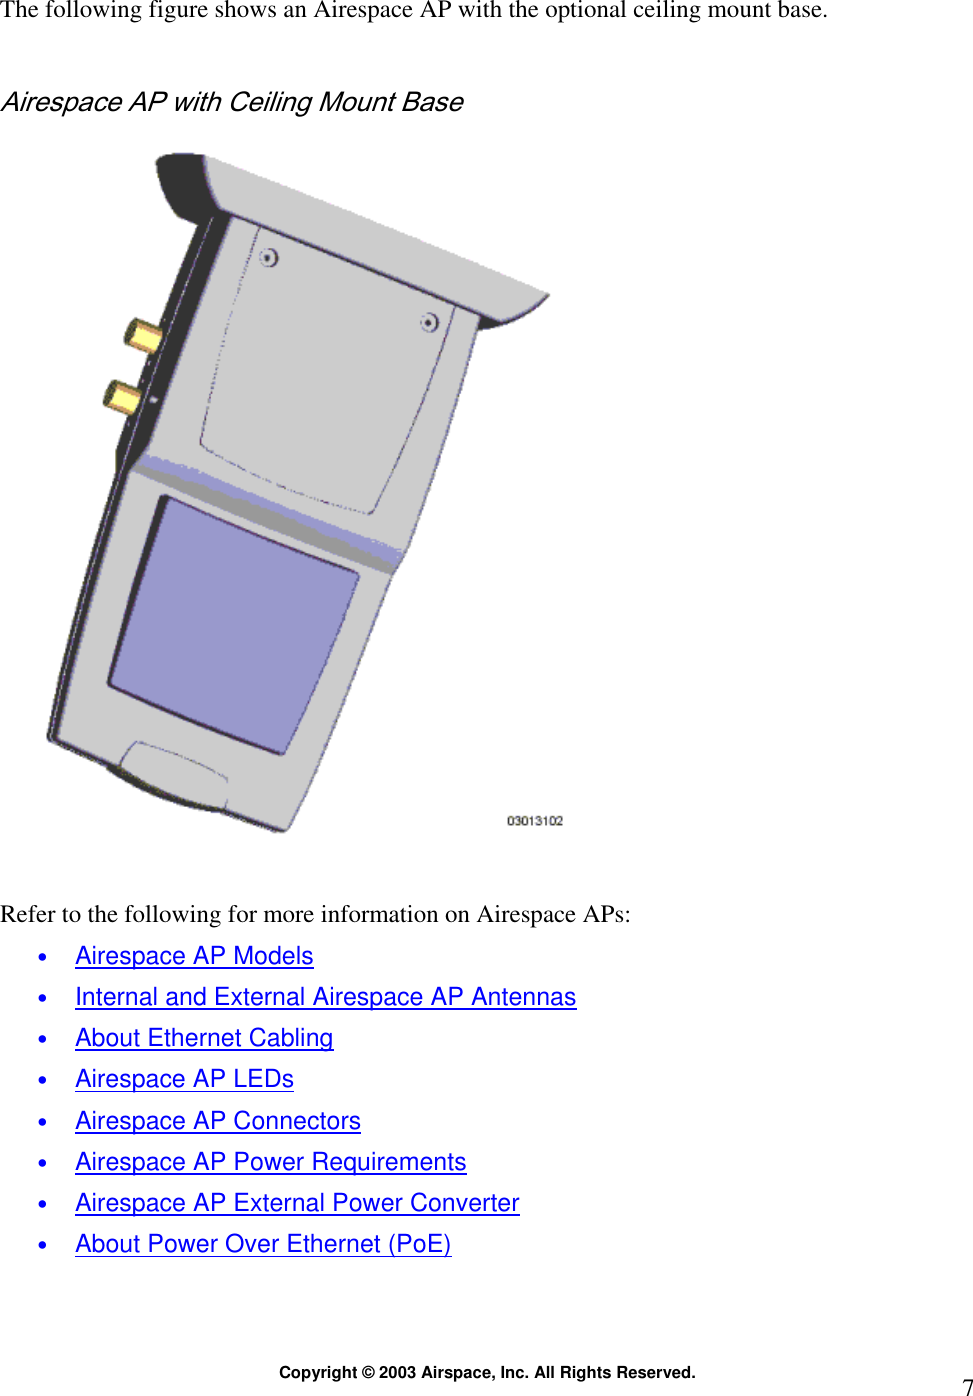  Copyright © 2003 Airspace, Inc. All Rights Reserved.  7The following figure shows an Airespace AP with the optional ceiling mount base.  Airespace AP with Ceiling Mount Base    Refer to the following for more information on Airespace APs: • Airespace AP Models • Internal and External Airespace AP Antennas • About Ethernet Cabling • Airespace AP LEDs • Airespace AP Connectors • Airespace AP Power Requirements • Airespace AP External Power Converter • About Power Over Ethernet (PoE) 